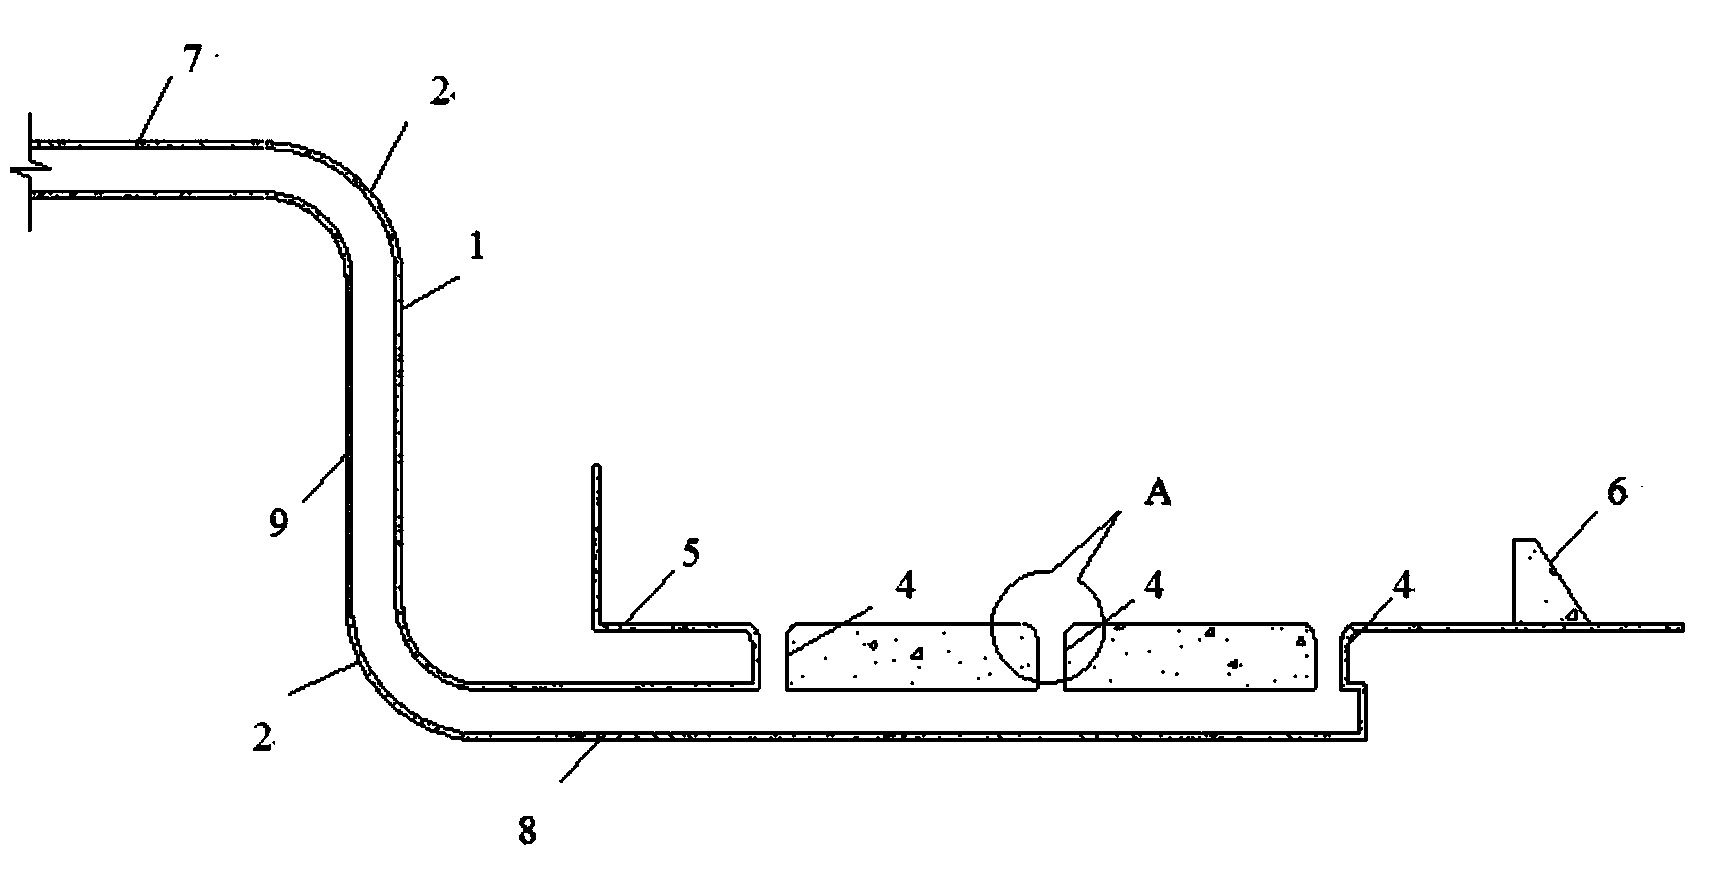 Underflow energy dissipater with pressurized pipeline used for outflow